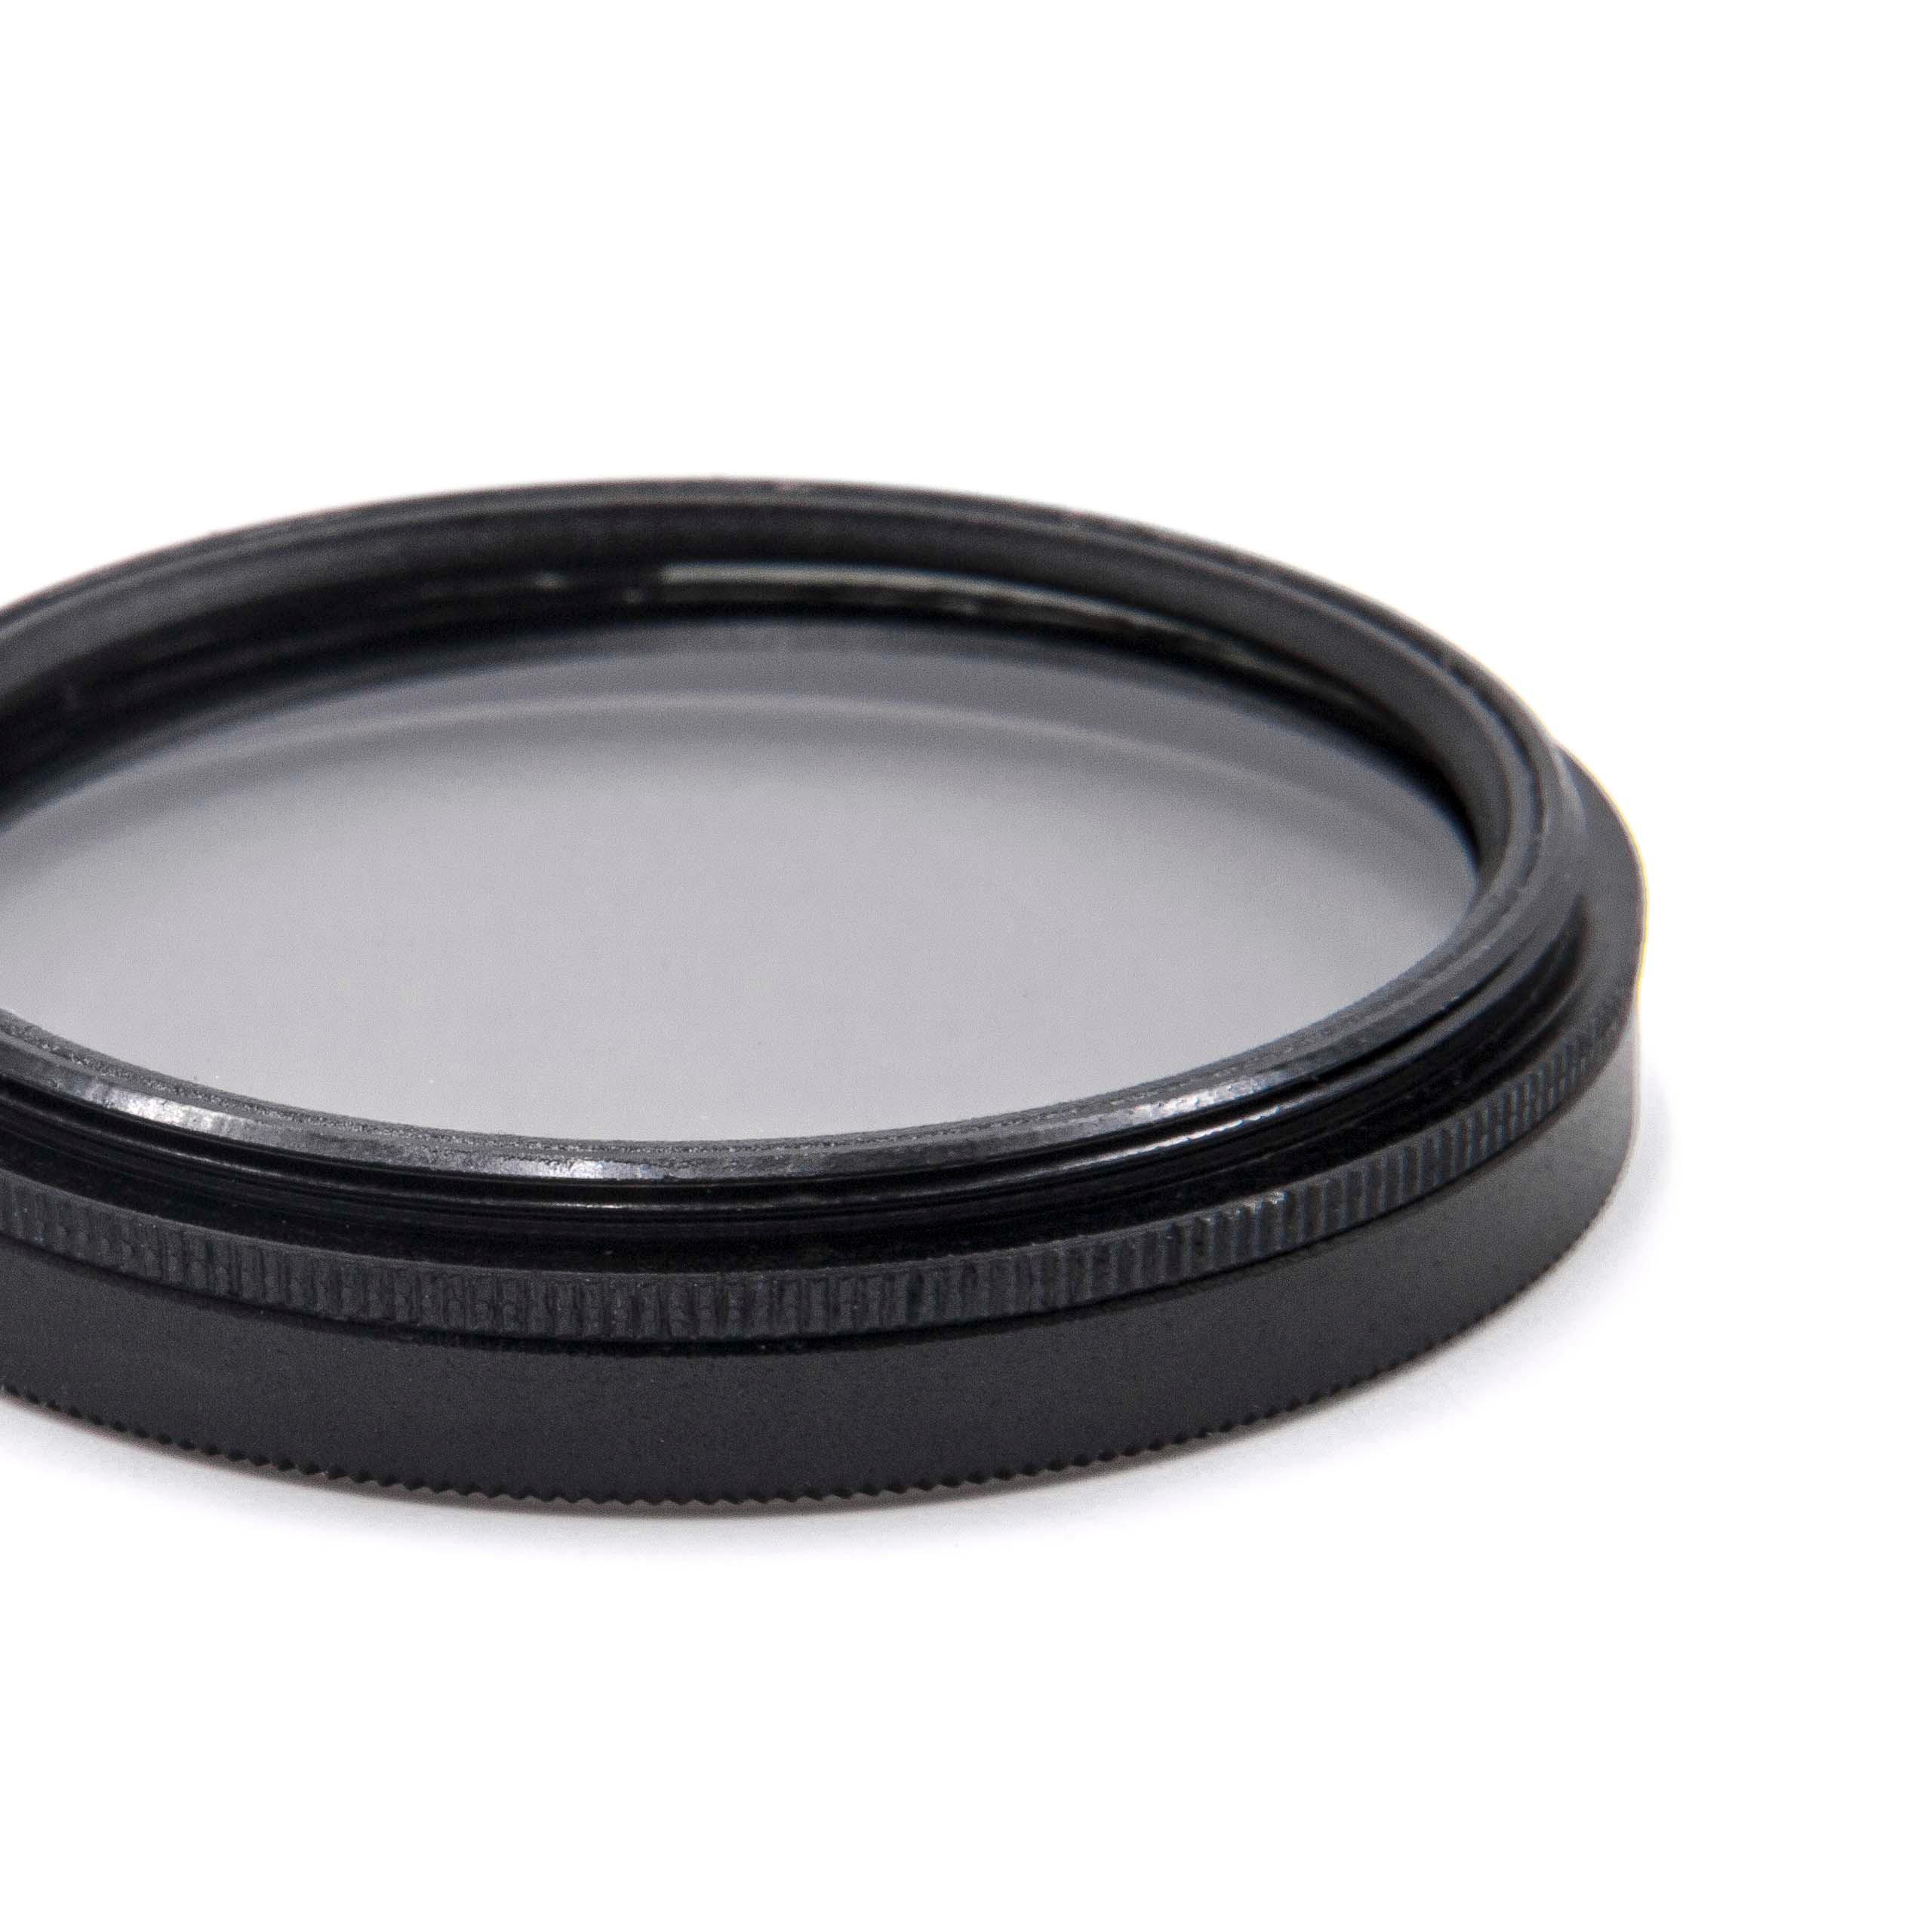 Polarising Filter suitable for Cameras & Lenses with 40.5 mm Filter Thread - CPL Filter